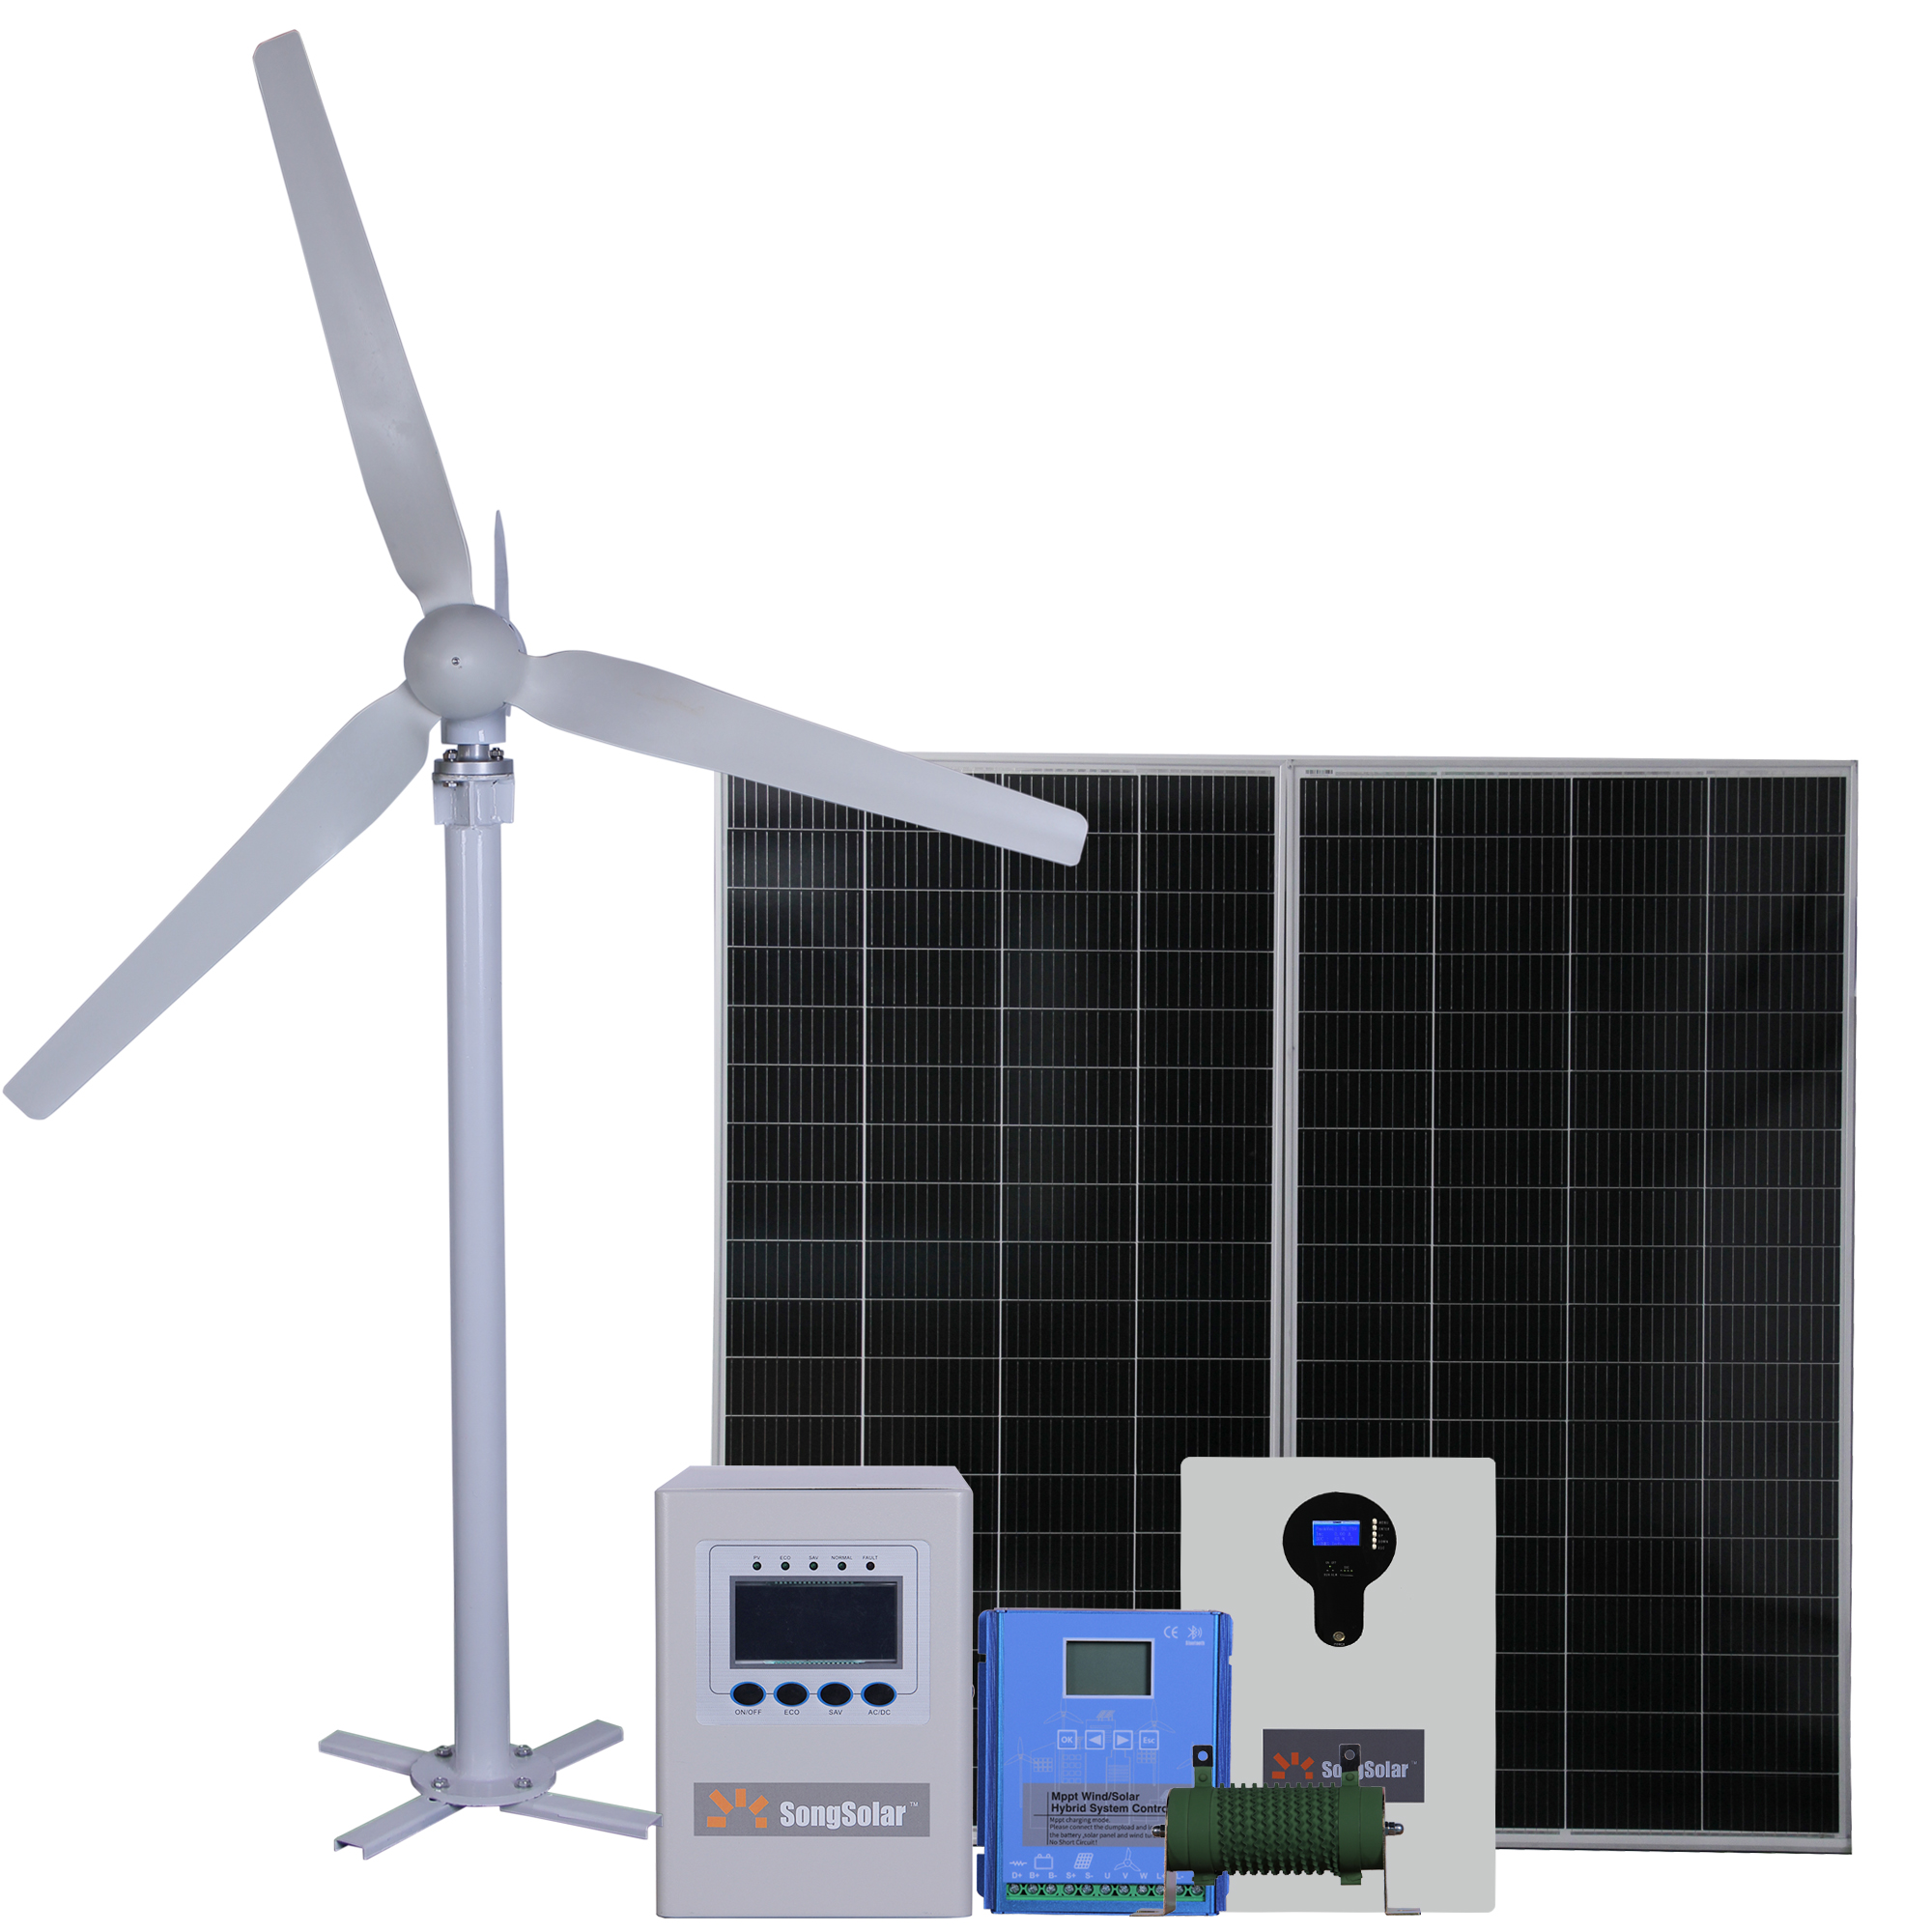 200W -100kW wind power generation Vertical Axis & Horizontal Axis Wind Turbine for Wind Energy Powery Systems